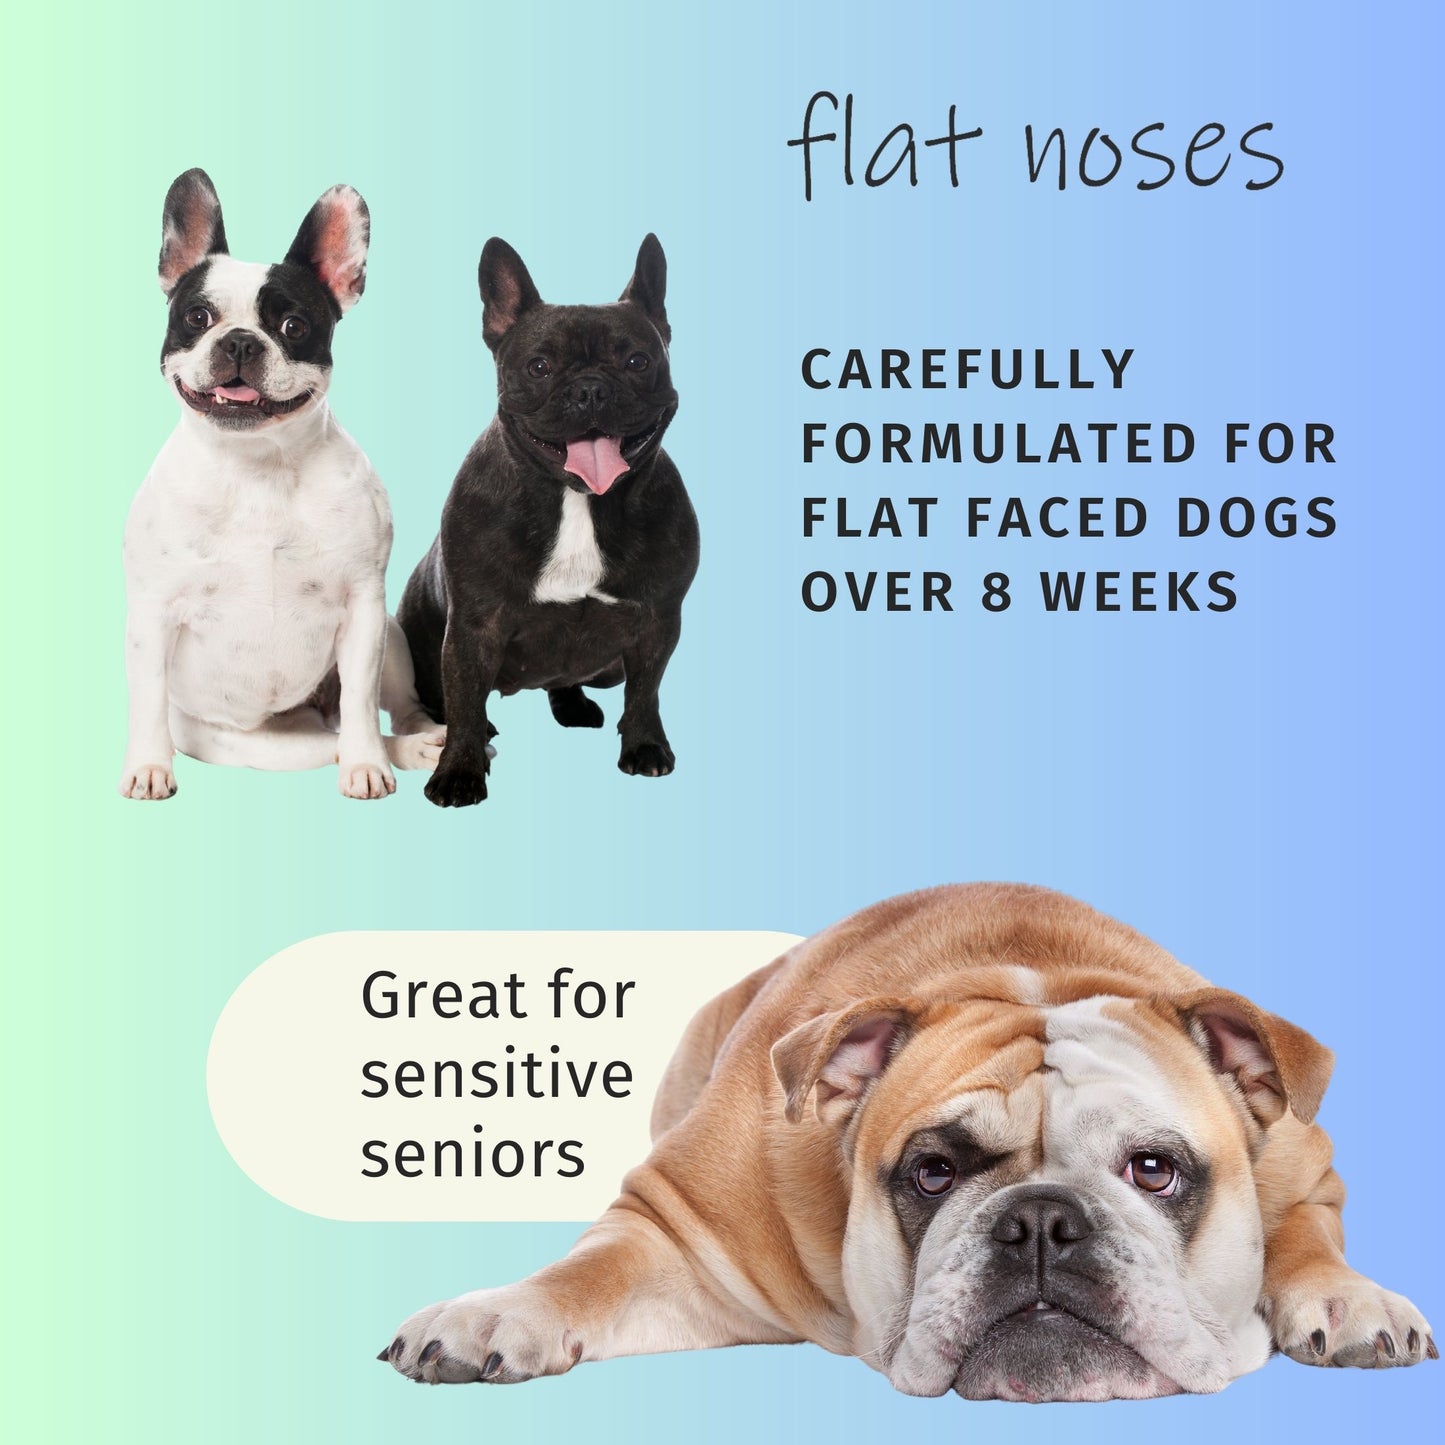 Flat Noses All in One Tearless All Natural Conditioning Shampoo - Perfect for Frenchies Bulldogs Boxers Pugs Brachycephalic - Aloe and Provitamin B5 Keep Dog Coat Soft, Shiny - Sulfate Free